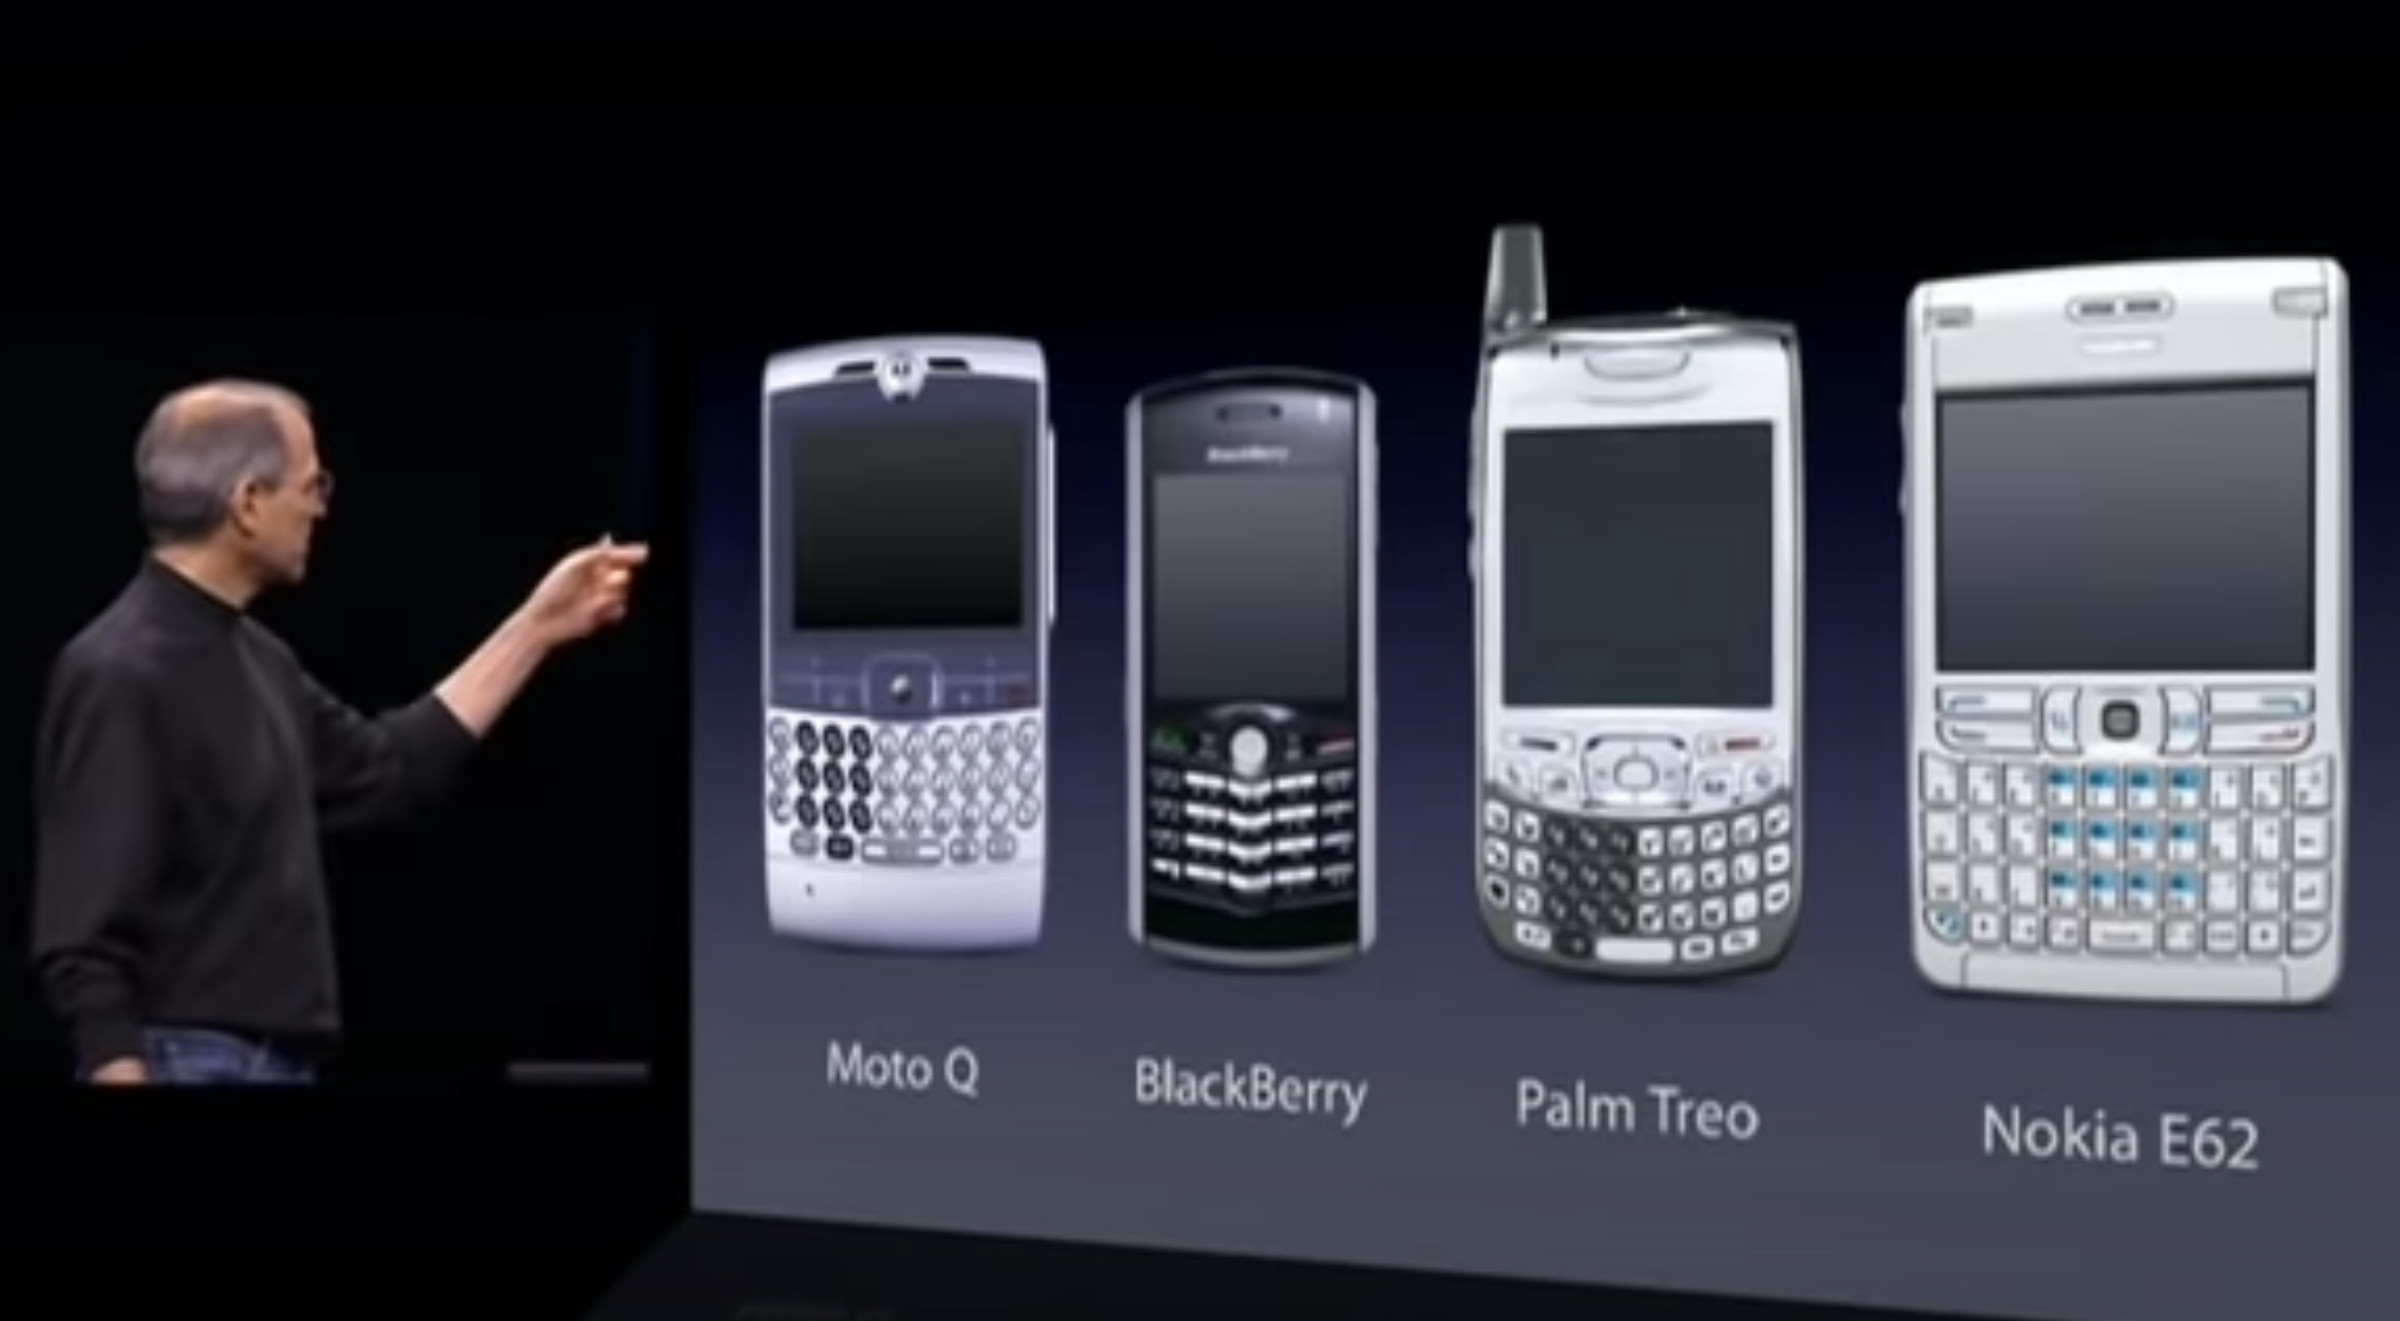 Steve Jobs pointing out the market leaders at the launch of the iPhone in 2007. 